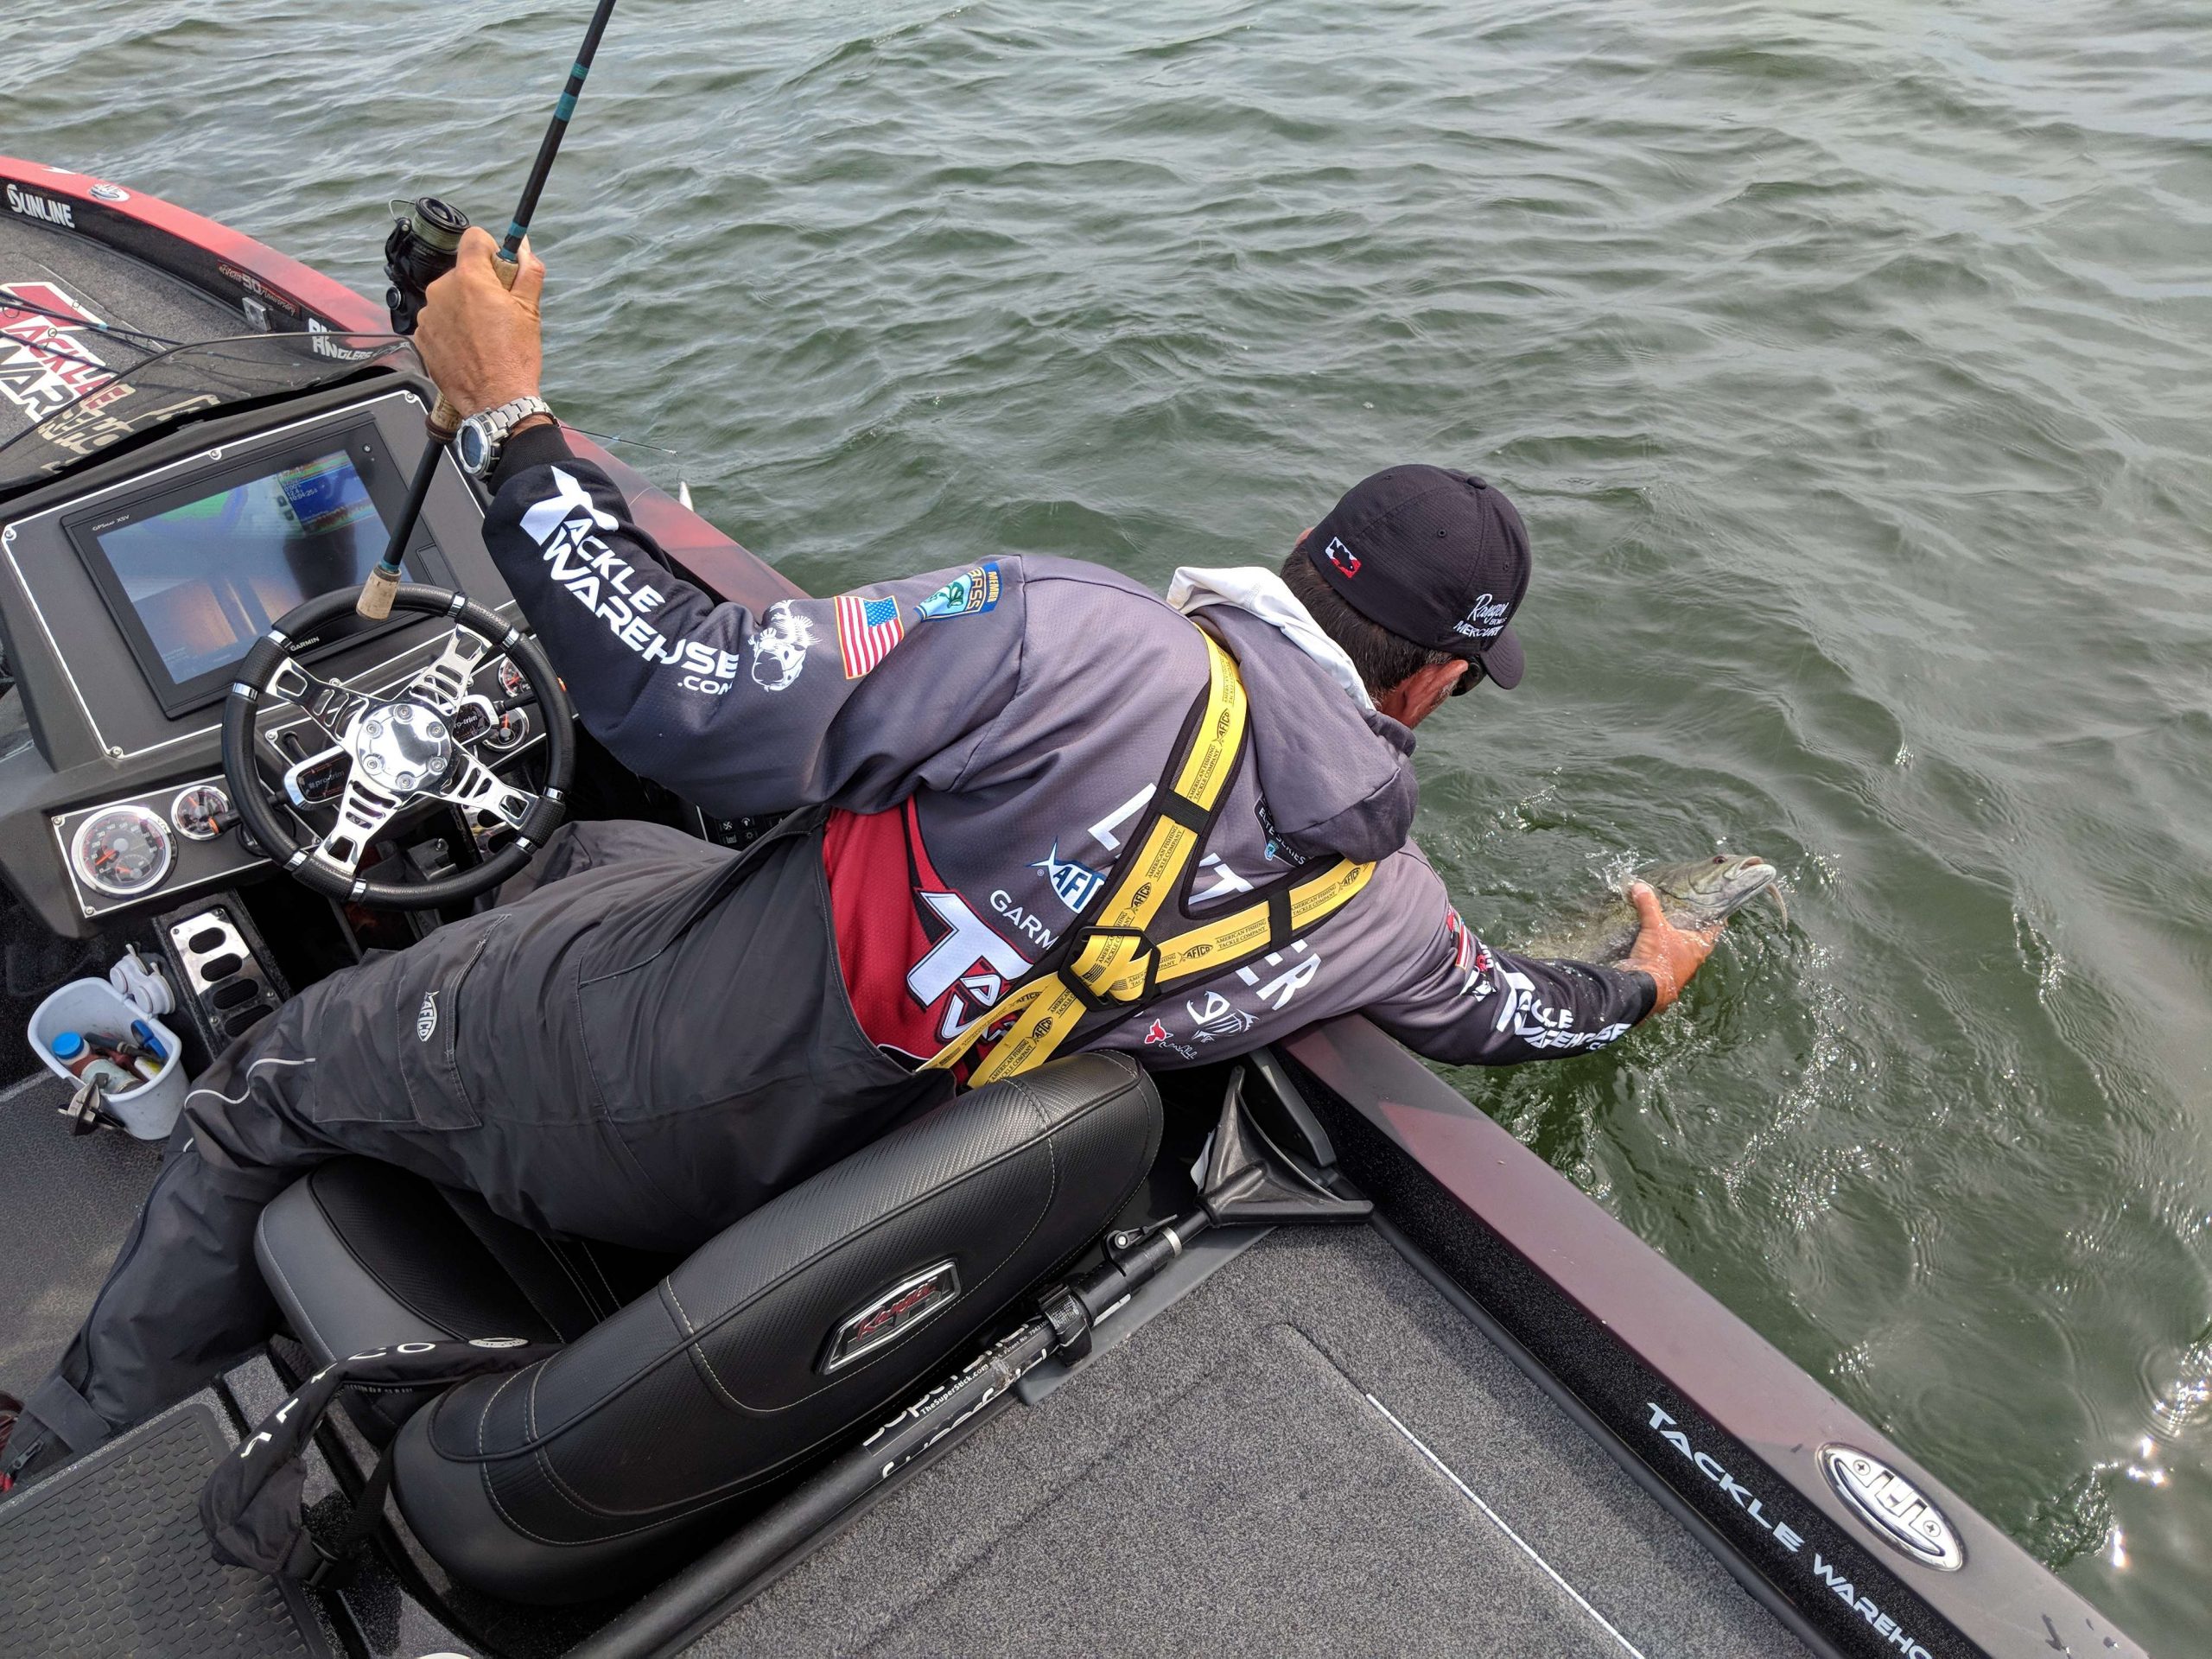 Jared Lintner finally got to a spot he was unable to hit yesterday due to mechanical issues. Looks to be paying off some early.